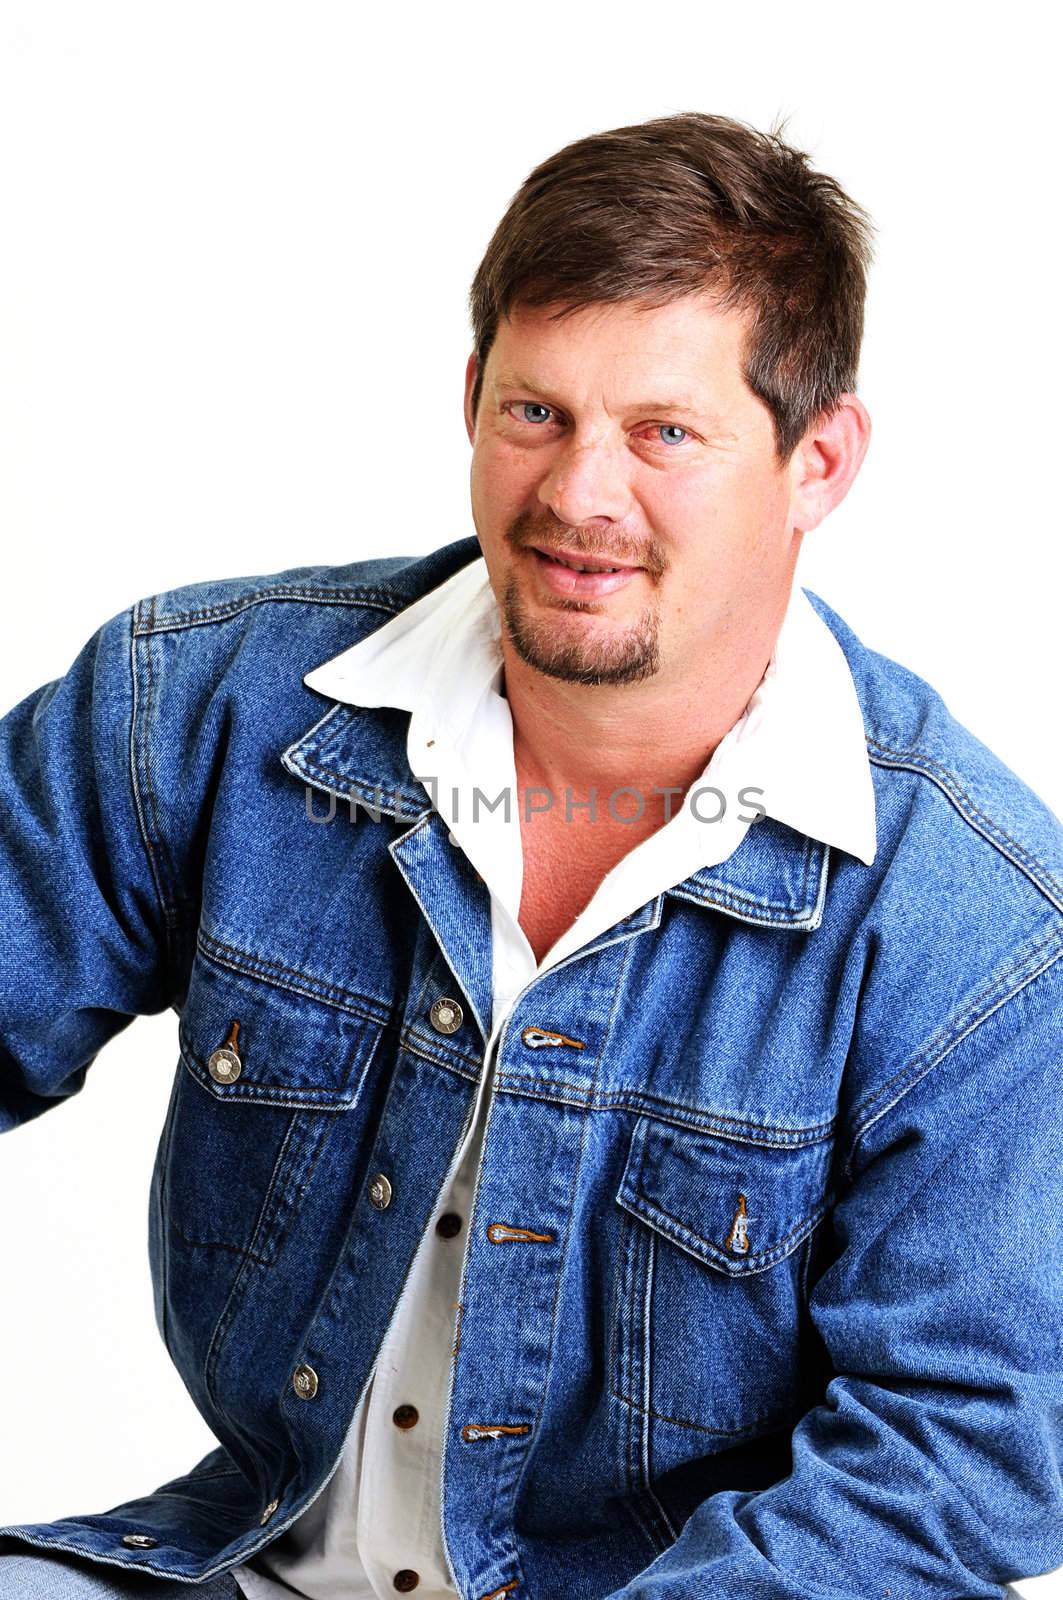 portrait of handsome male model with beard and smiling wearing a jeans jacket